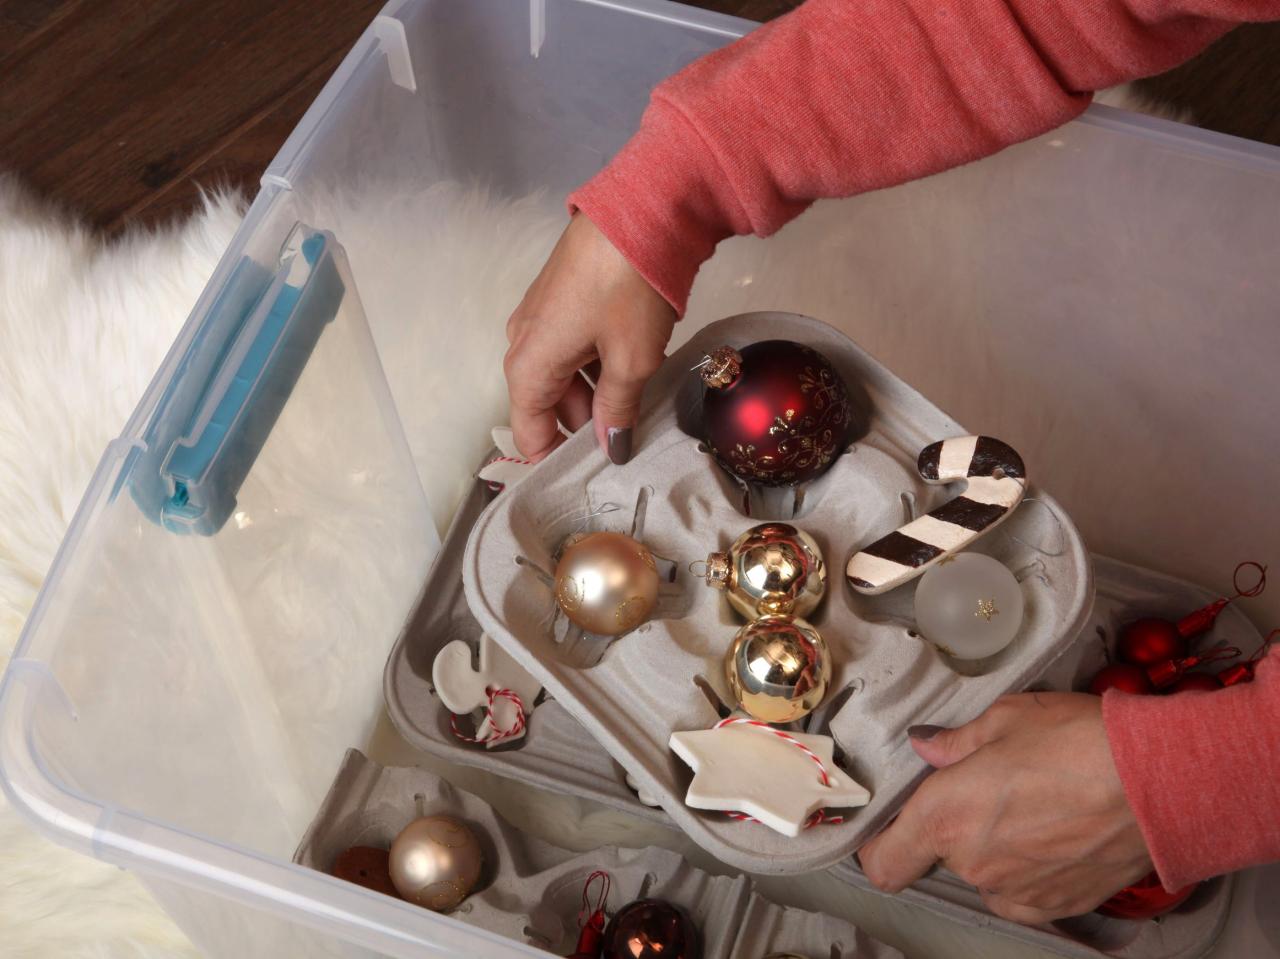 The Best Christmas Storage Ideas: How to Organize Decorations